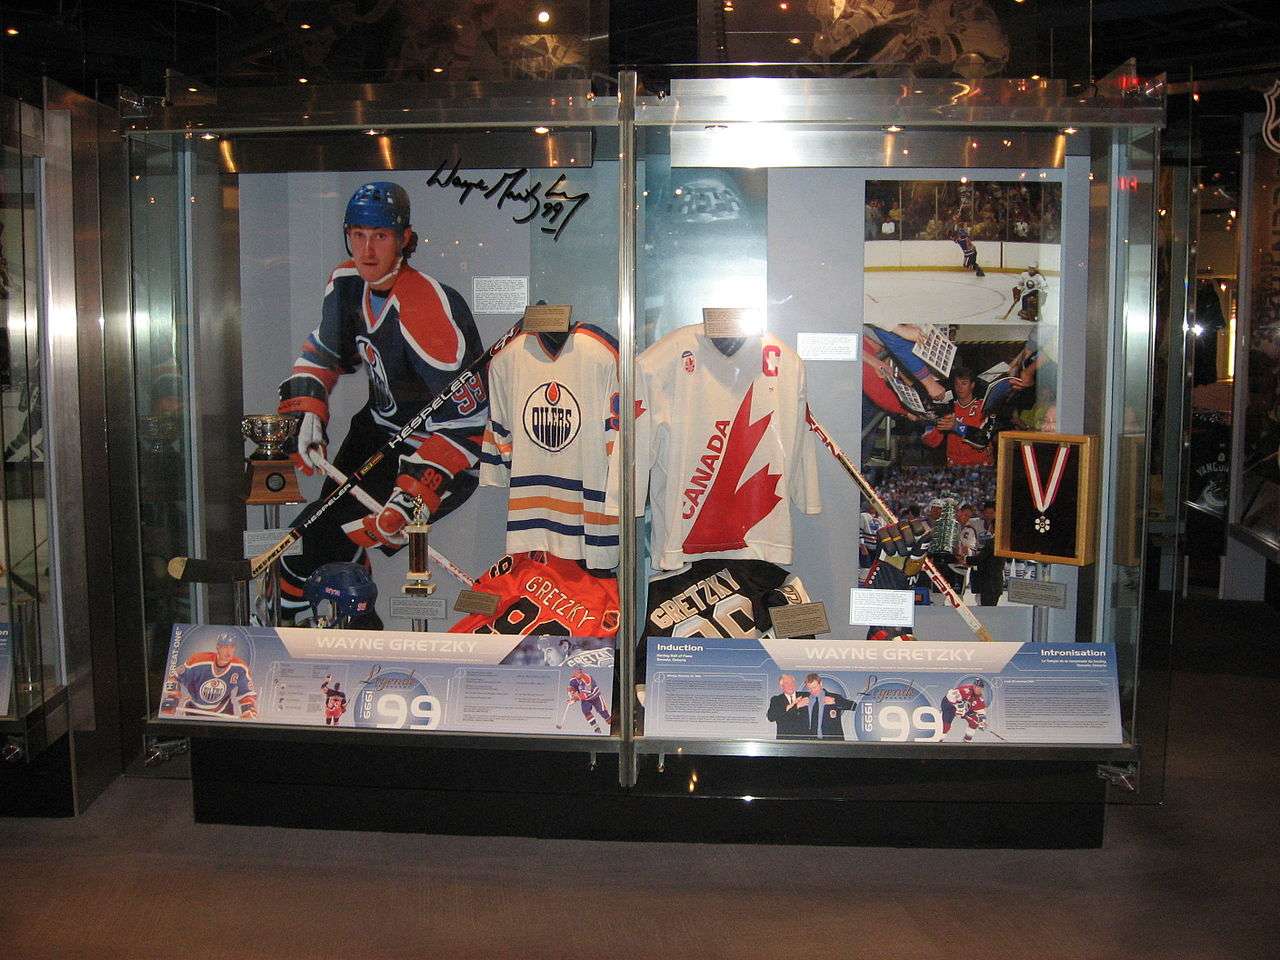 An exhibit on Gretzky at the Hockey Hall of Fame